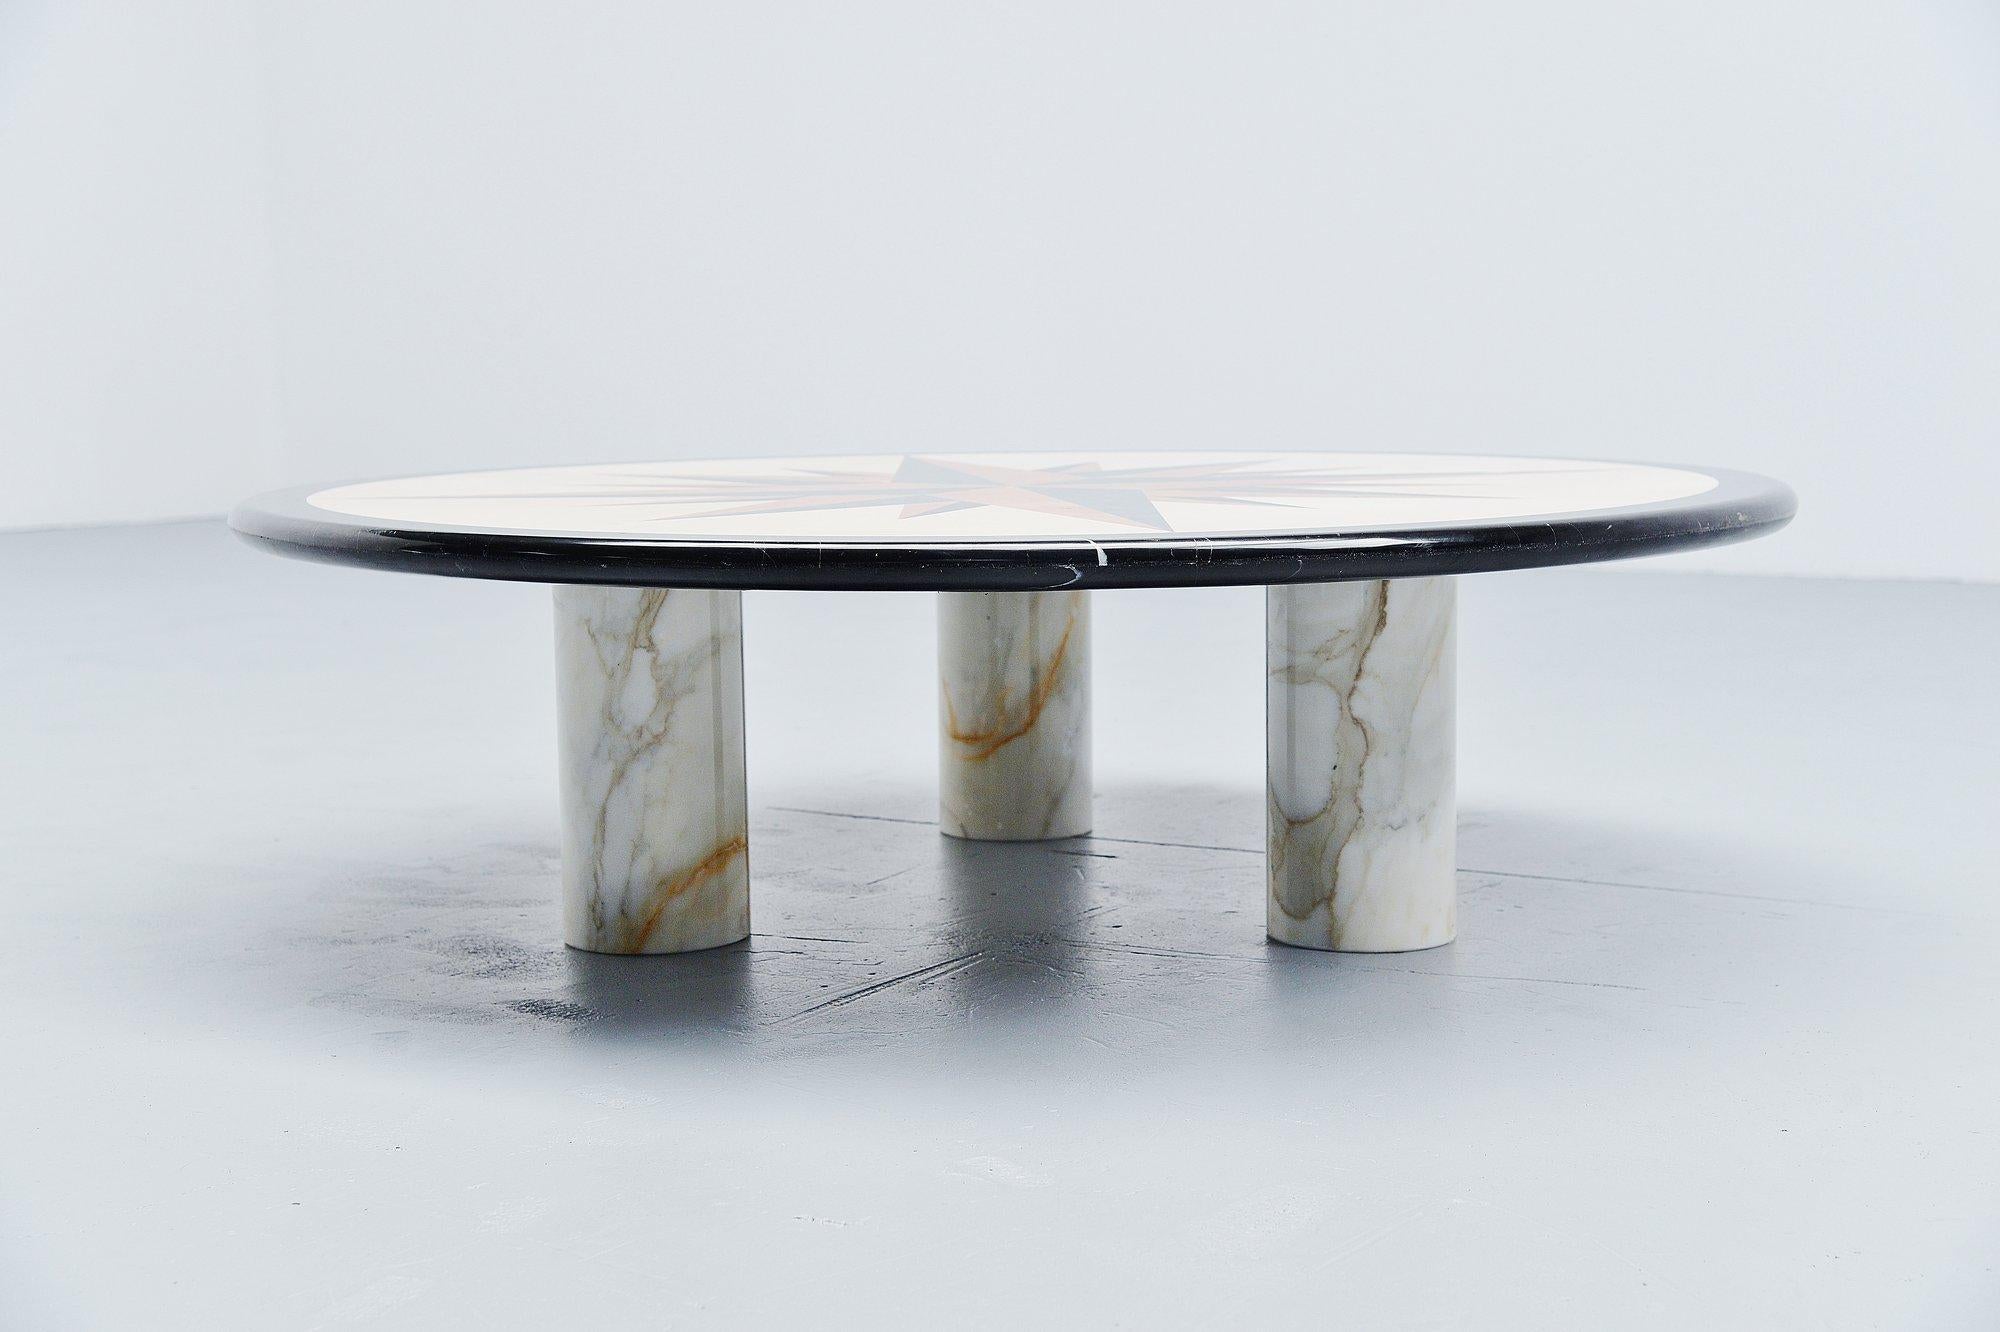 Fantastic and extremely heavy post modern coffee table made in the Memphis period, Italy 1980. This table has a fantastic shaped marble inlayed top with different colors and types of marble. Three cylindrical solid marble feet support the heavy